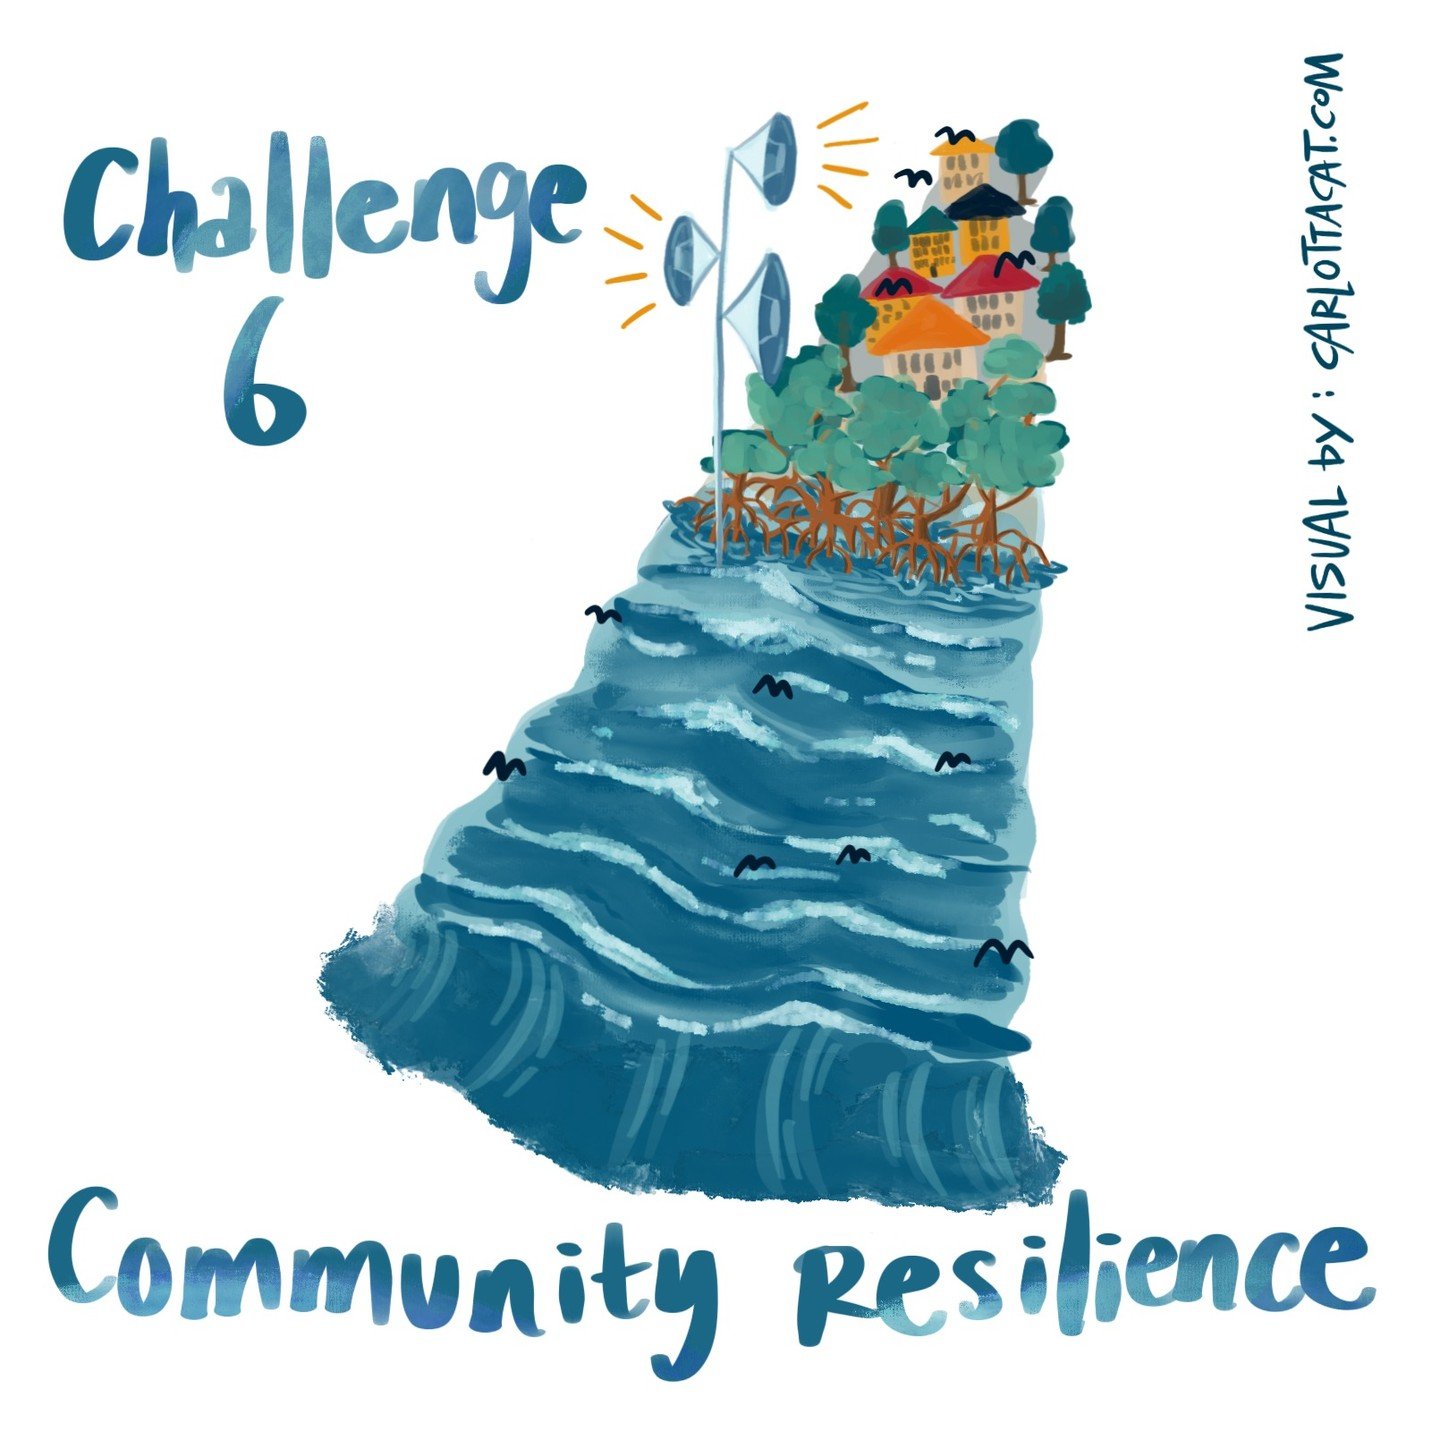 UN Ocean Decade challenge 6: Community resilience

Sea levels and extreme weather events are on the rise. Did you know that mangrove forests and coral reefs act as natural barriers to floods and storm surges? That&rsquo;s why restoring them is a win-